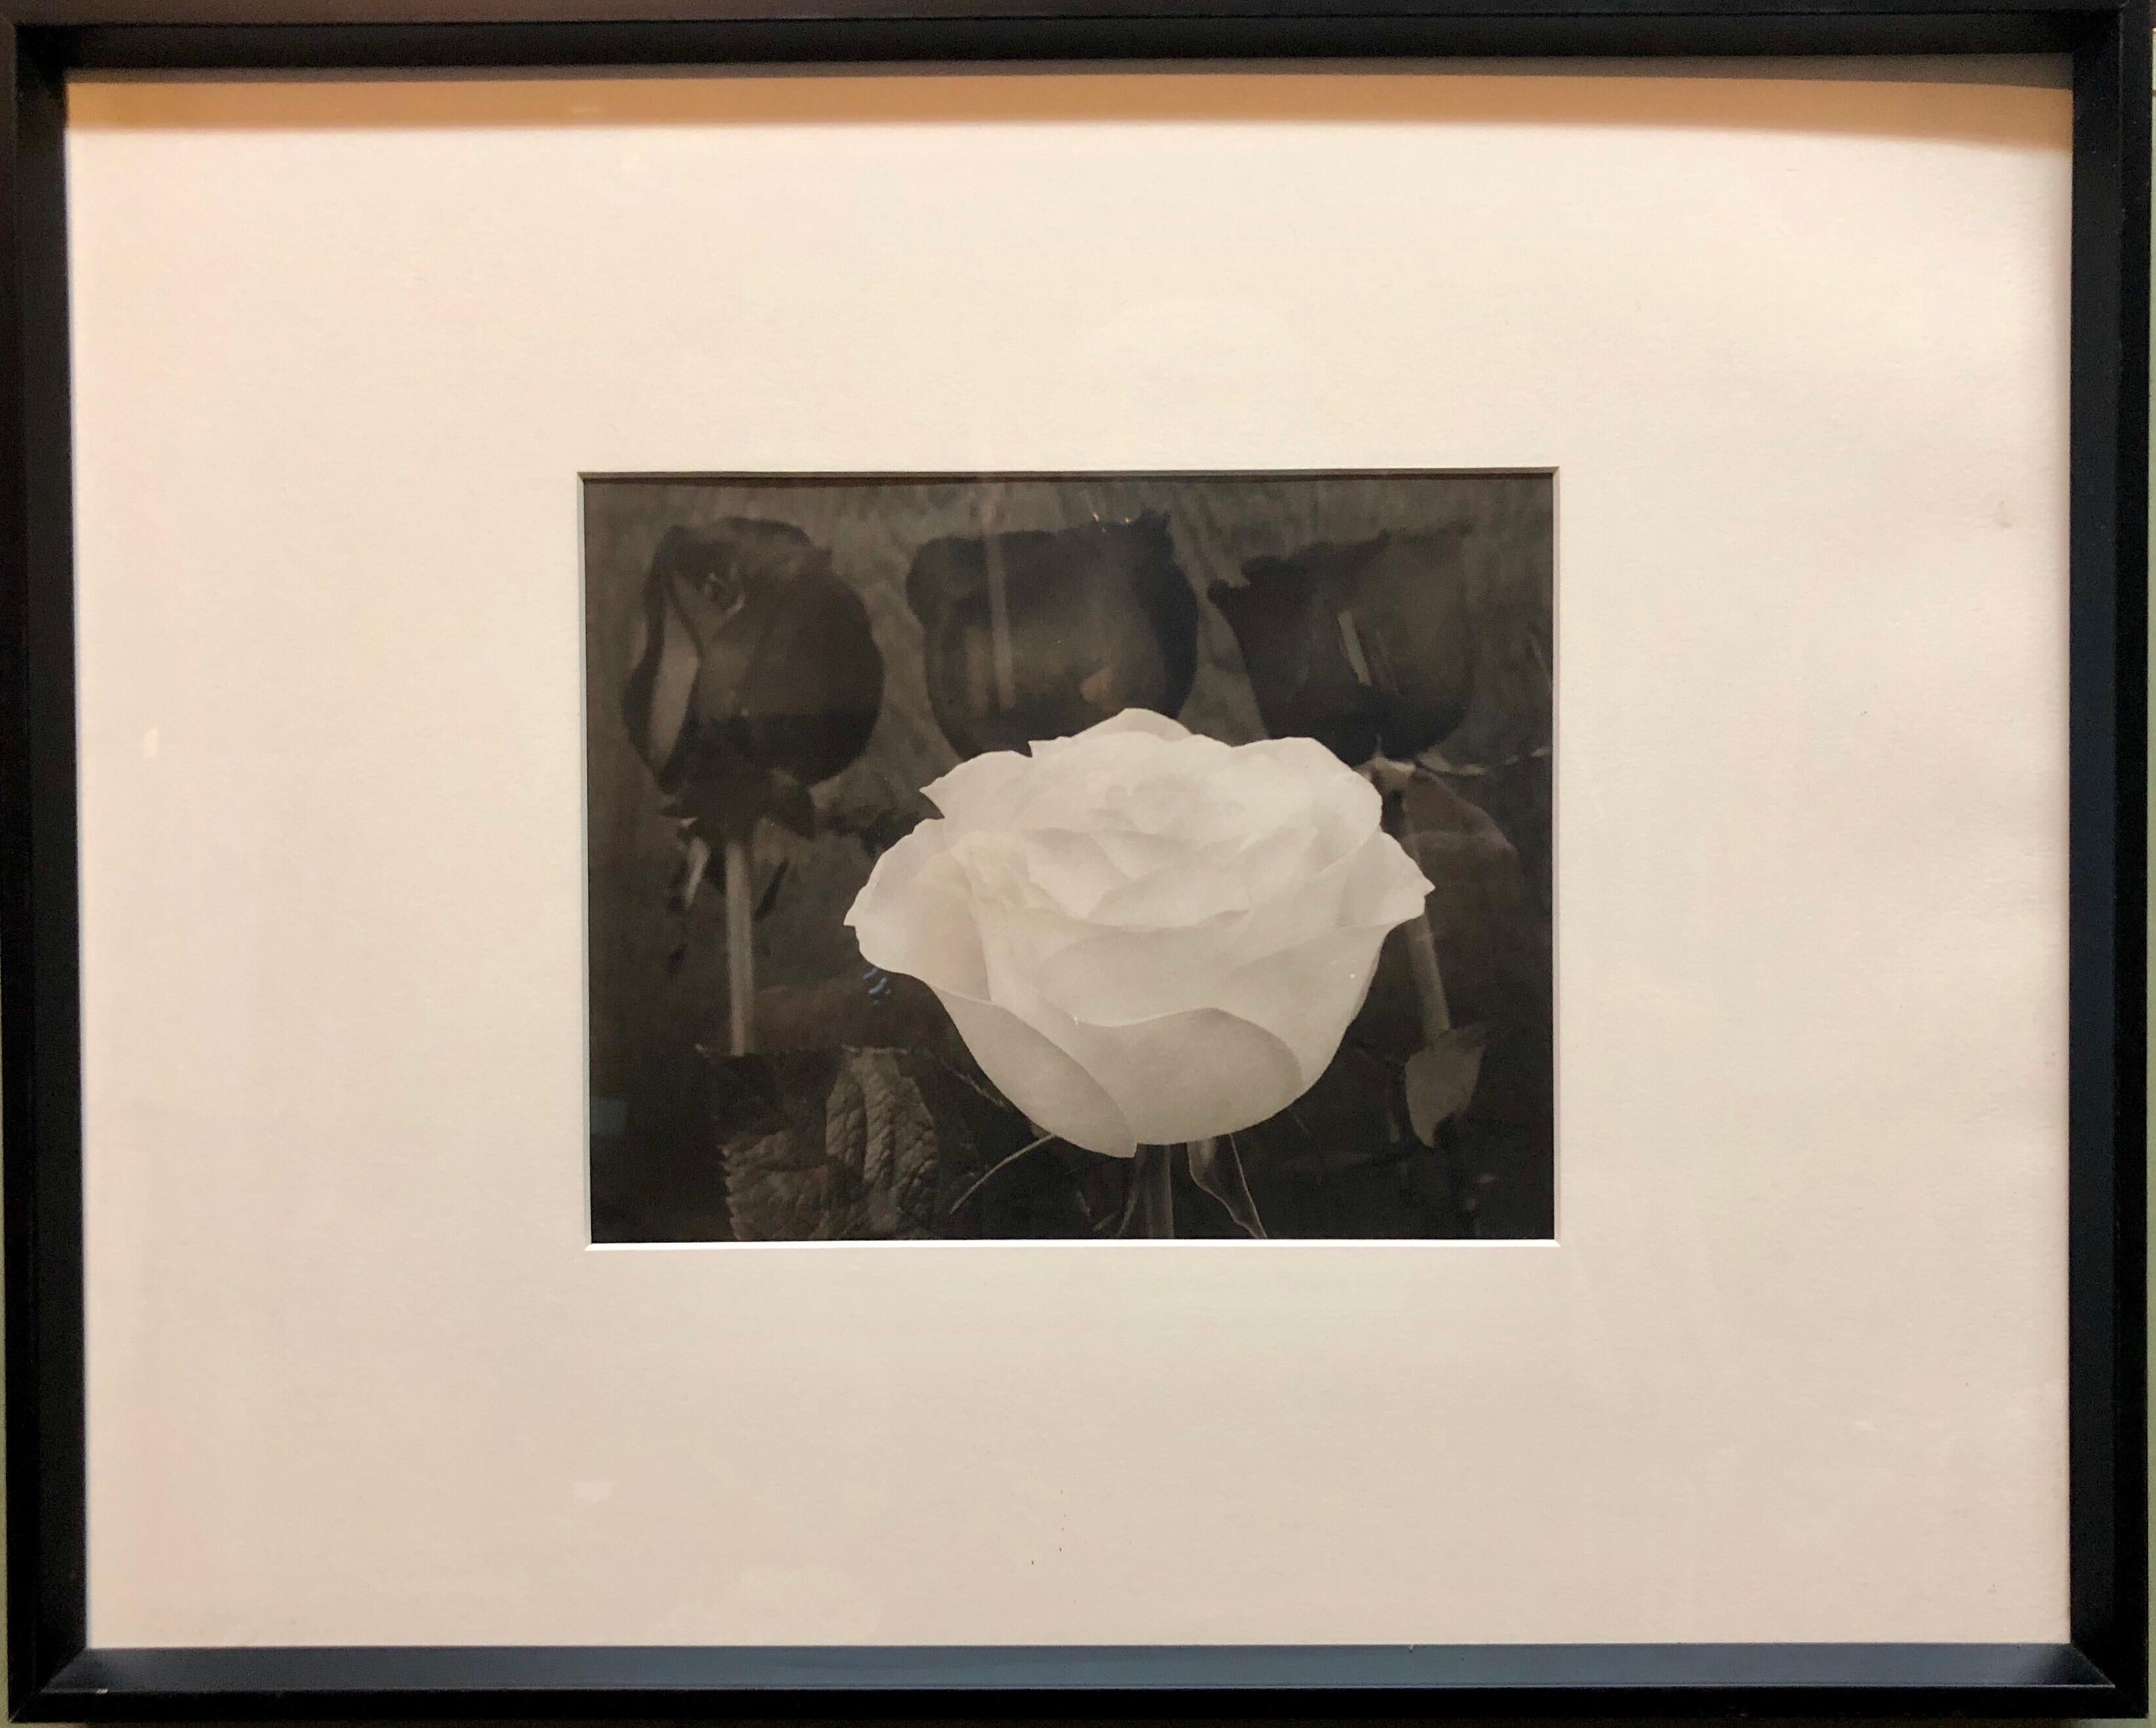 16.5x20.5, 7.5x9.5 actual image

Born in 1957 at Kalamazoo and raised in Detroit, MI, Tom Ferguson has photographed still lifes, flowers, botanicals, collage, city-scapes and landscapes. He works in platinum, palladium, cyanotype, gum, silver